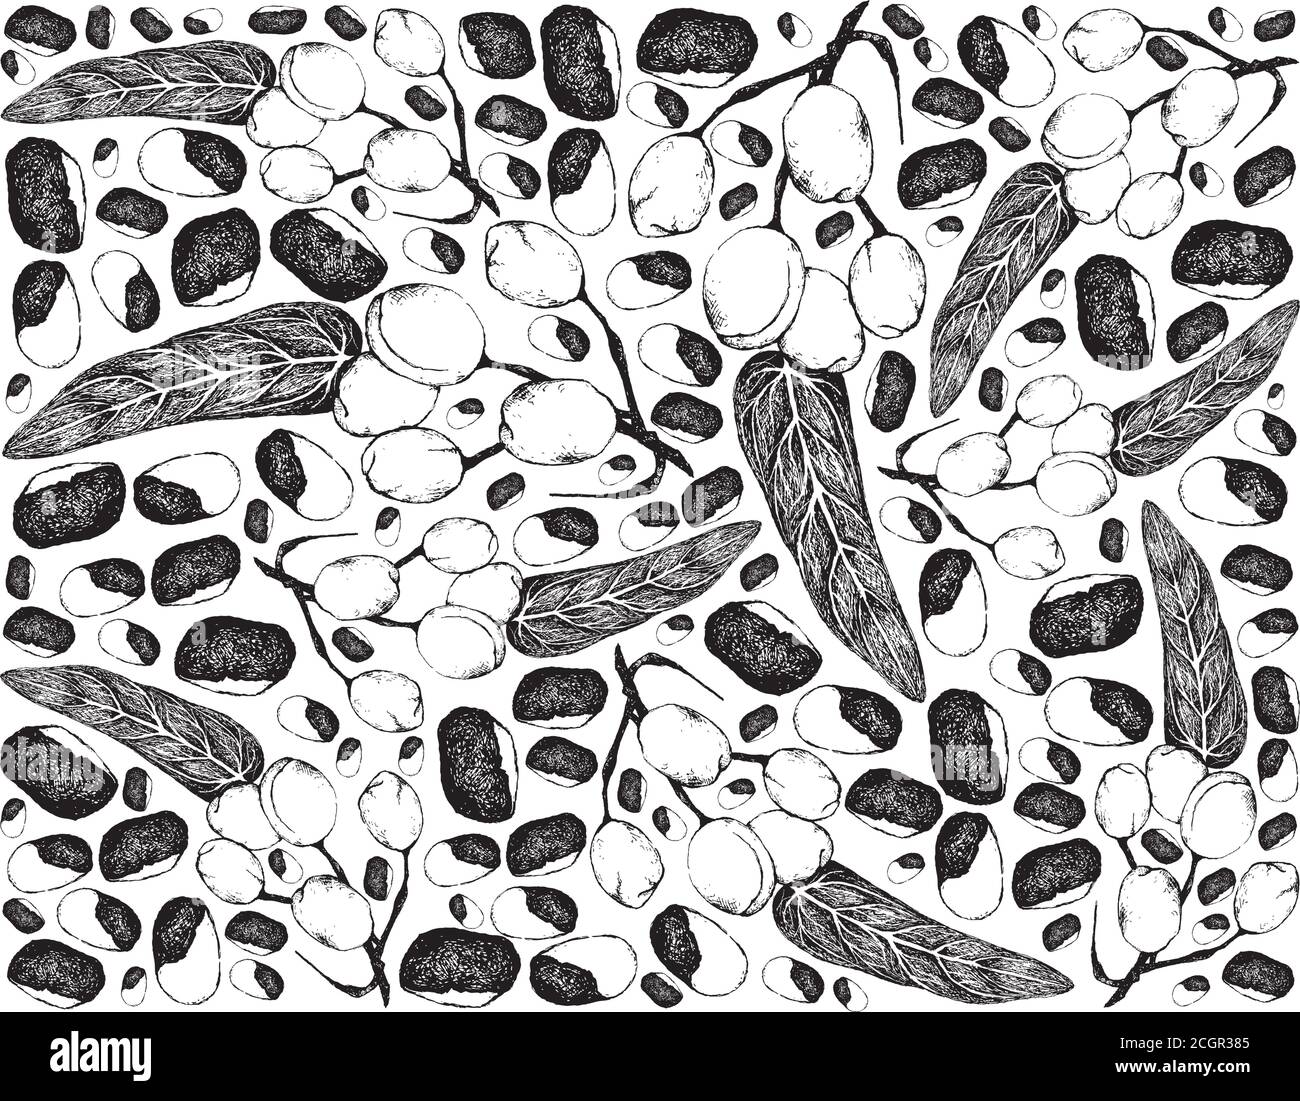 Nut and Bean, Illustration Hand Drawn Sketch Background of Wild Almond, Barking Deer’s Mango or Irvingia Malayana Fruits on A Tree, Good Source of Die Stock Vector